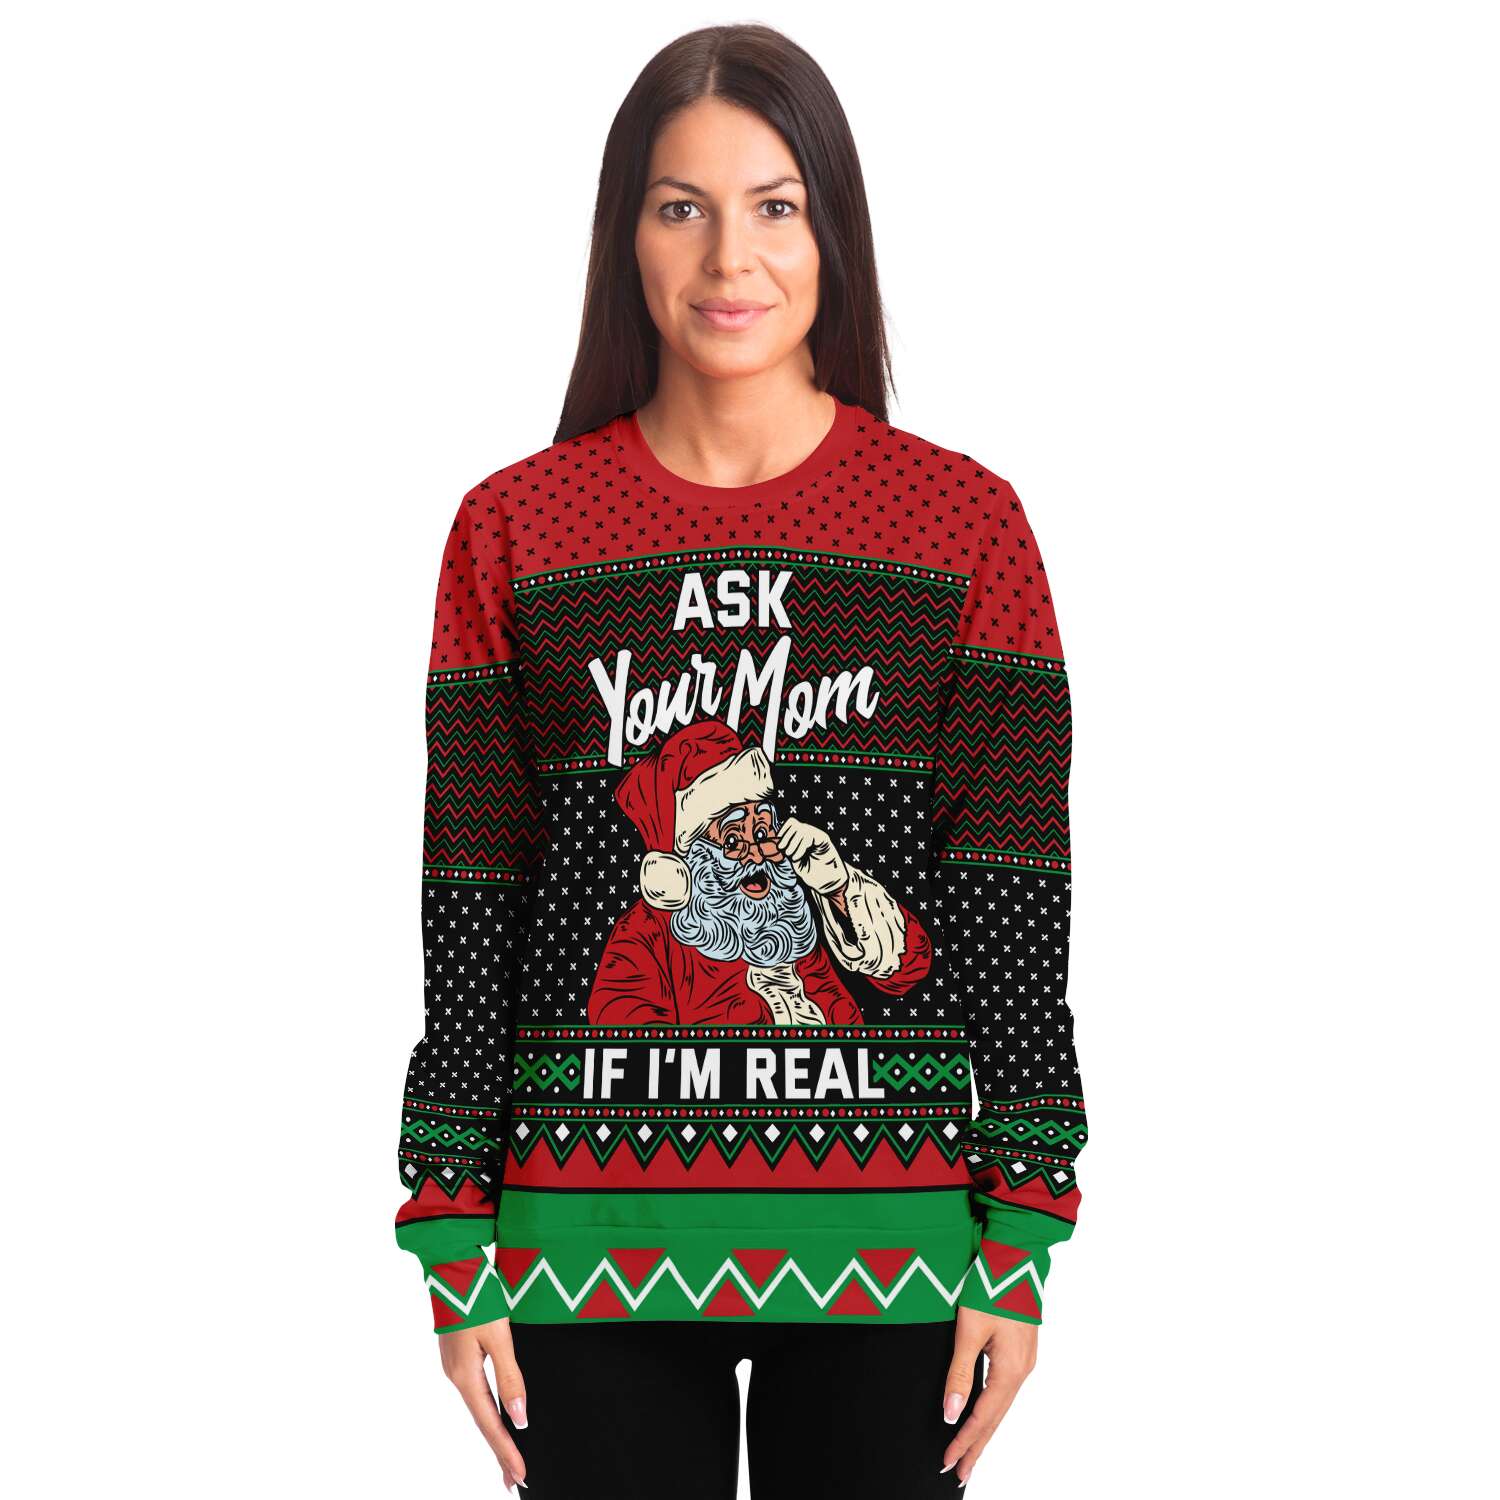 Ask Your Mom if Im Real Sweatshirt | Unisex Ugly Christmas Sweater, Xmas Sweater, Holiday Sweater, Festive Sweater, Funny Sweater, Funny Party Shirt